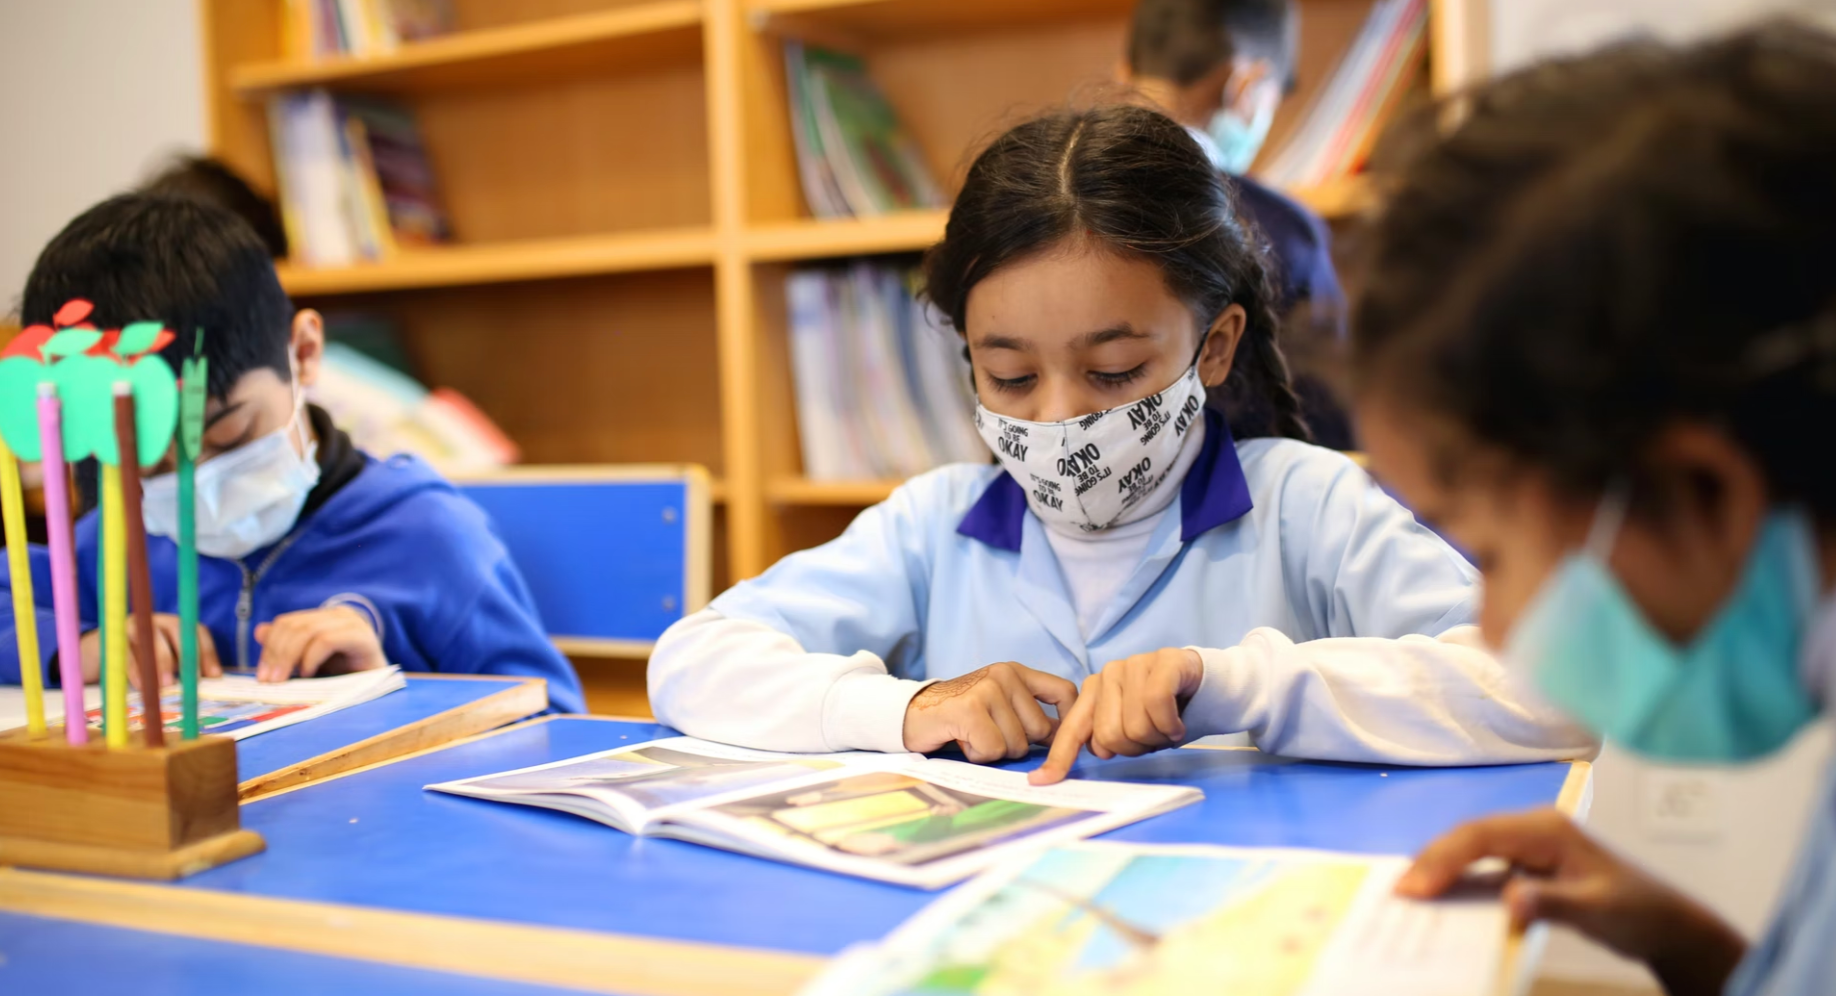 US Department Of Education's Expanded ESSER Program Could Pave The Way For Air Quality Upgrades In Schools